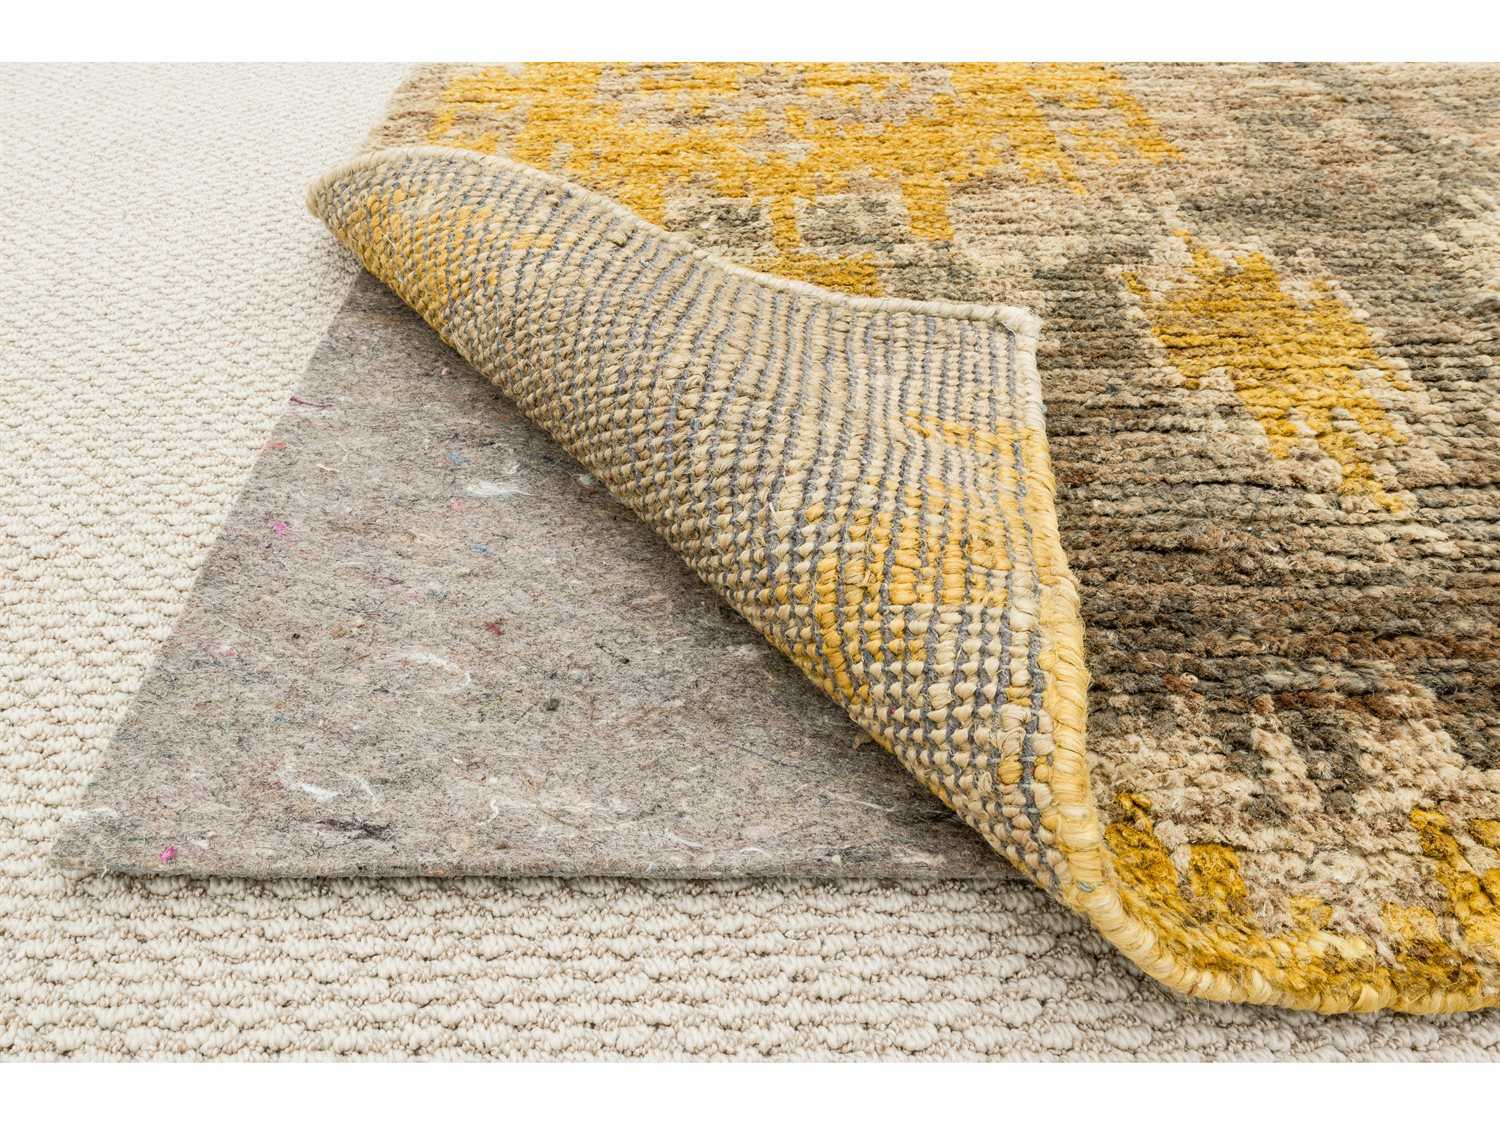 Colonial Mills Eco-Stay 9x12 Rectangular Rug Pad